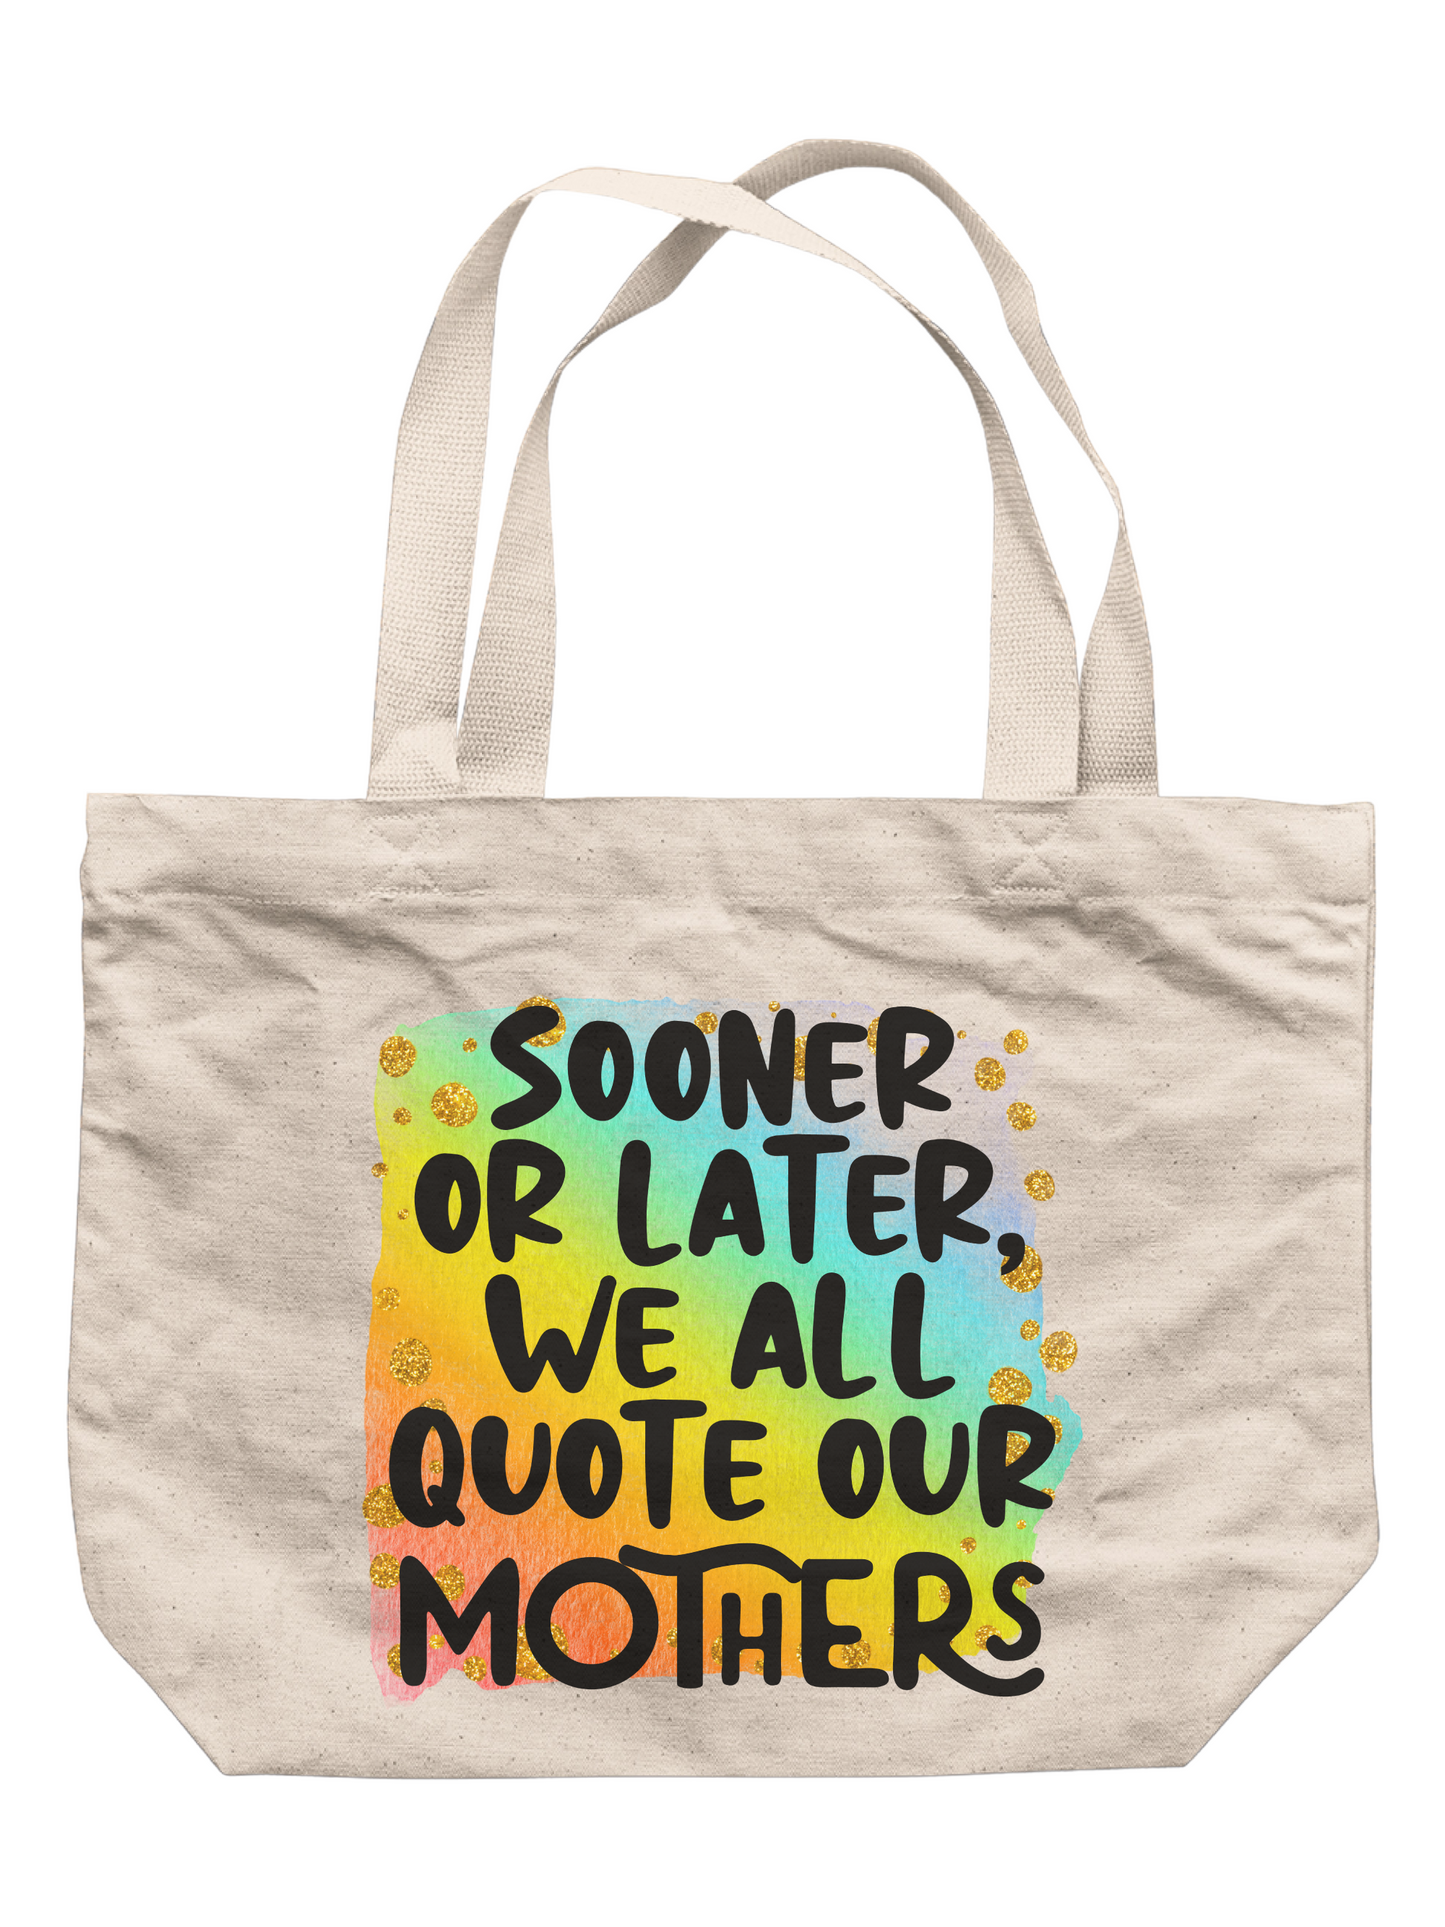 Sooner Or Later We All Quote Our Mothers Tote Bag